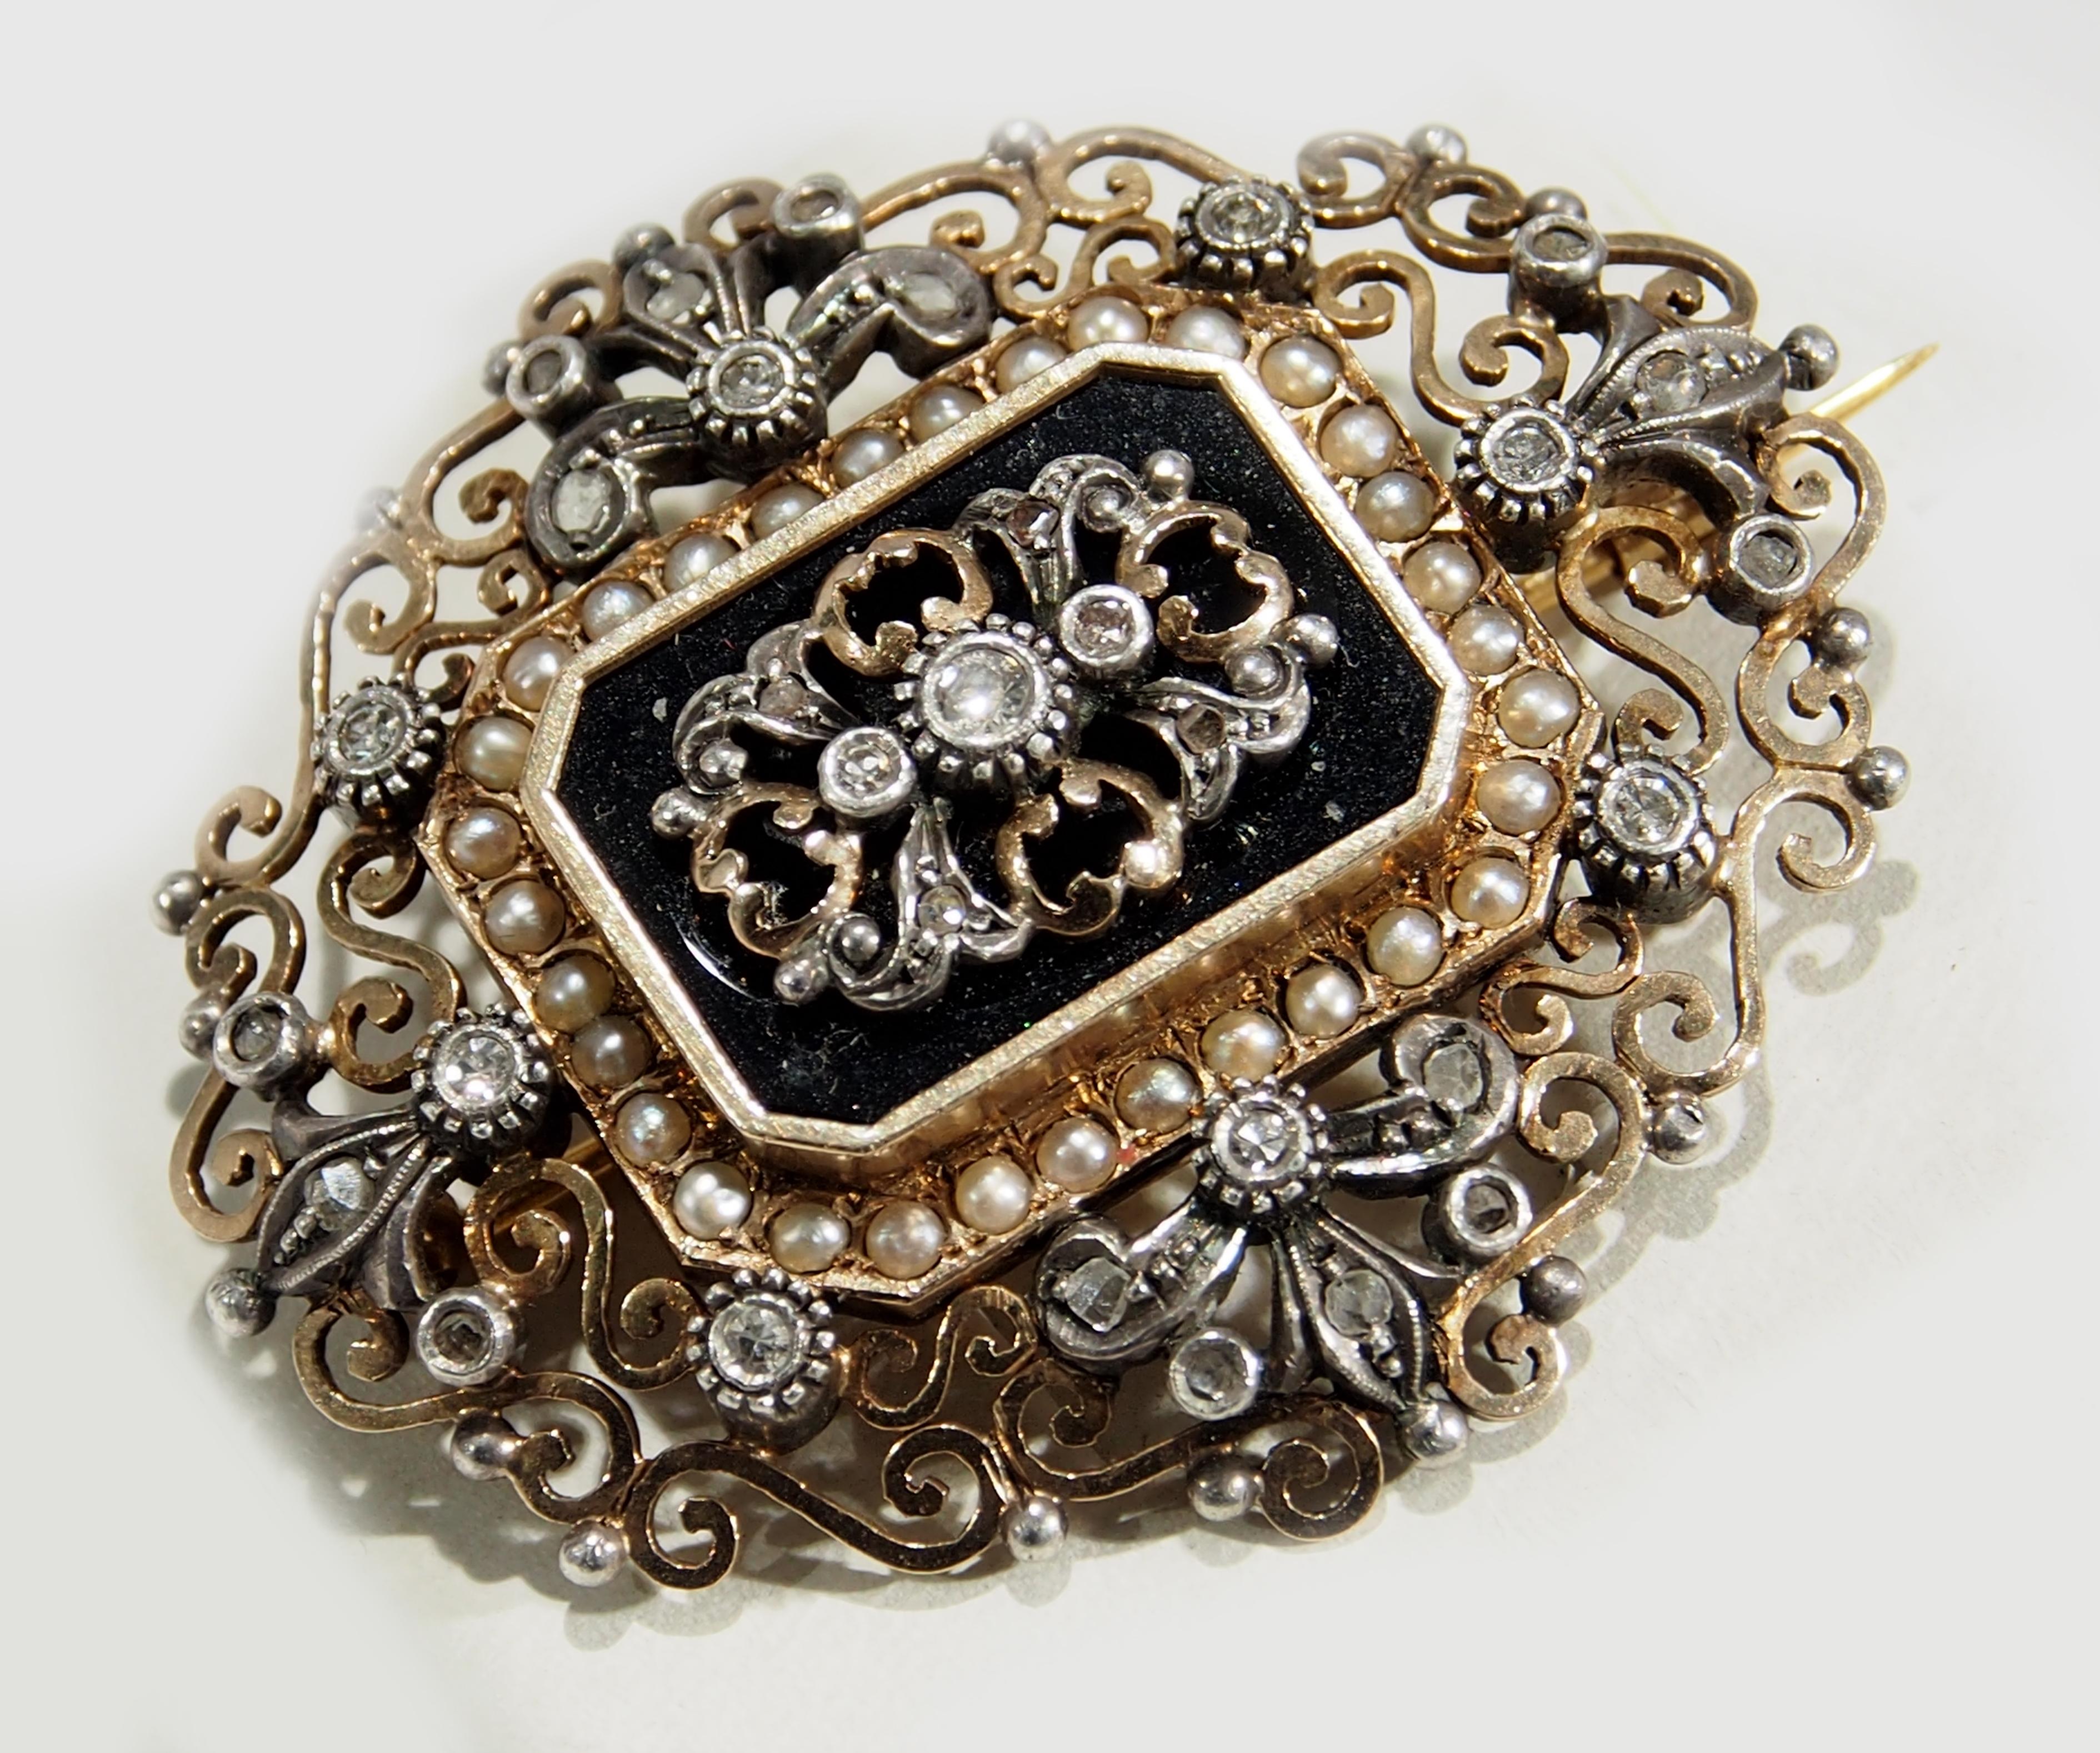 For the collector of fine Edwardian jewelry is this 18K Yellow and White Gold Pin/Brooch. This 1 3/4 inch in length Brooch is elegantly designed with scroll work in an oval shape. Contrasting the oval is an octagonal center Black Onyx framed by